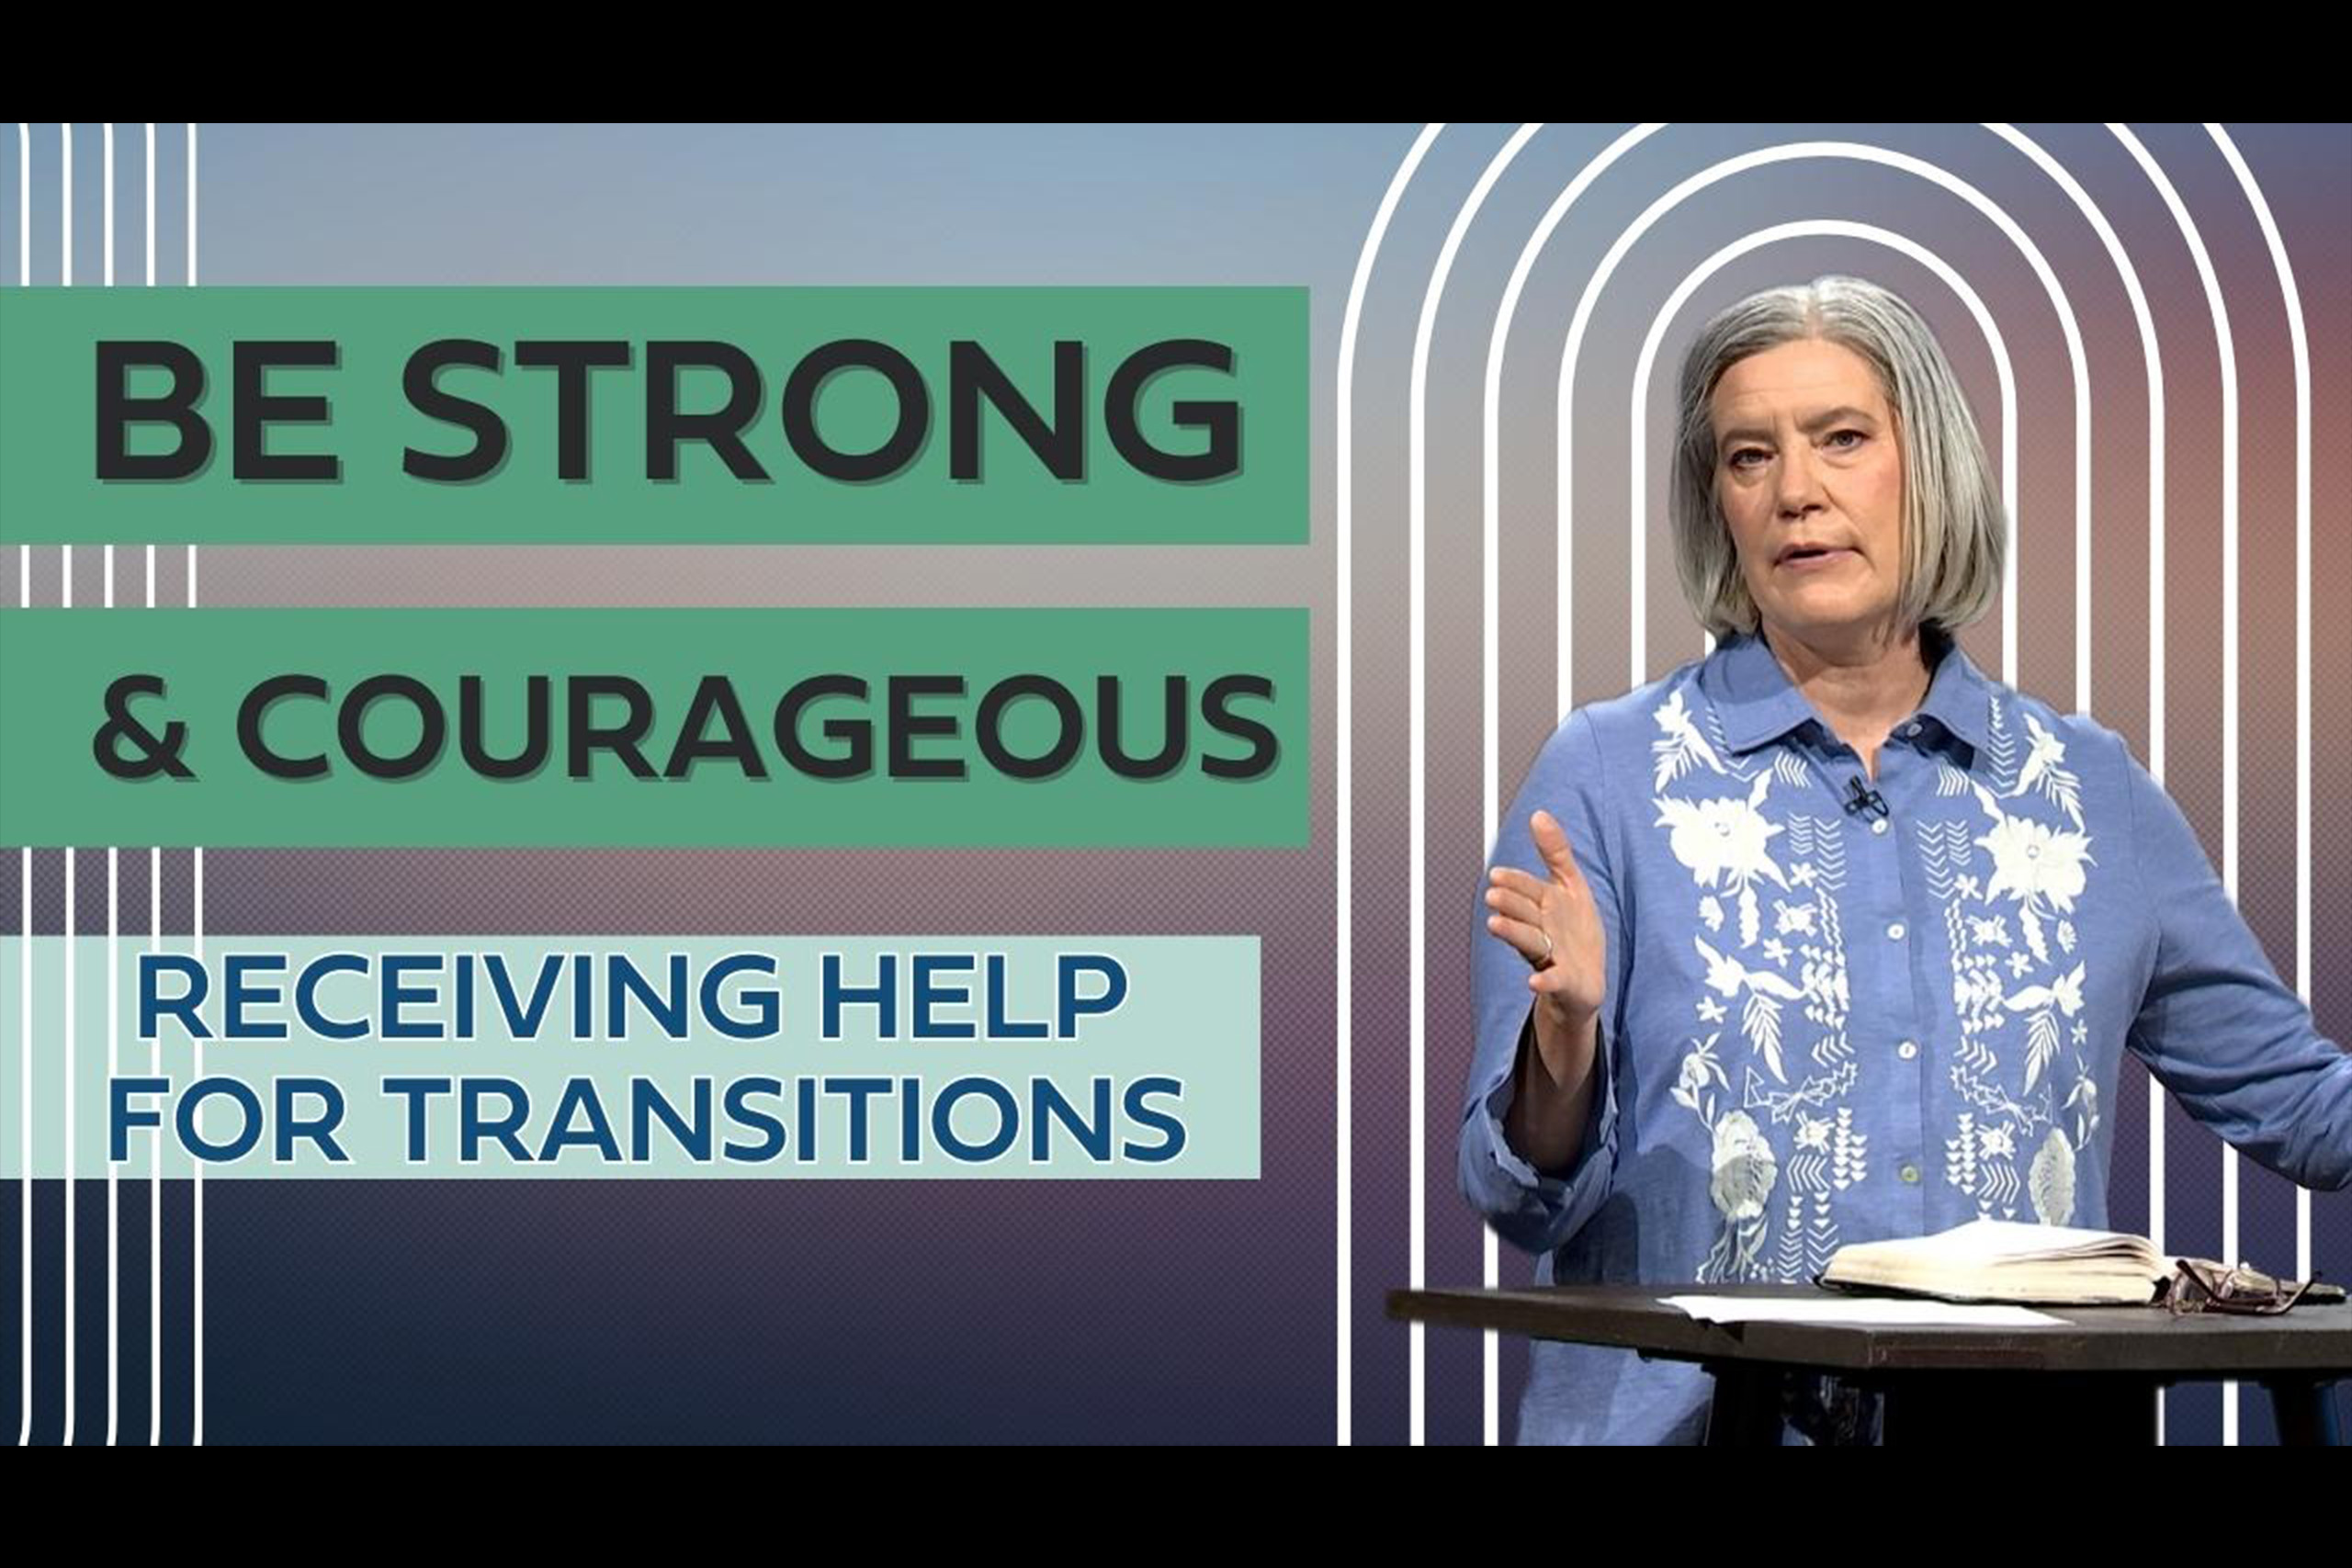 2-Be-Strong-and-Courageou-Receiving-Help-for-Transitions_Thumb